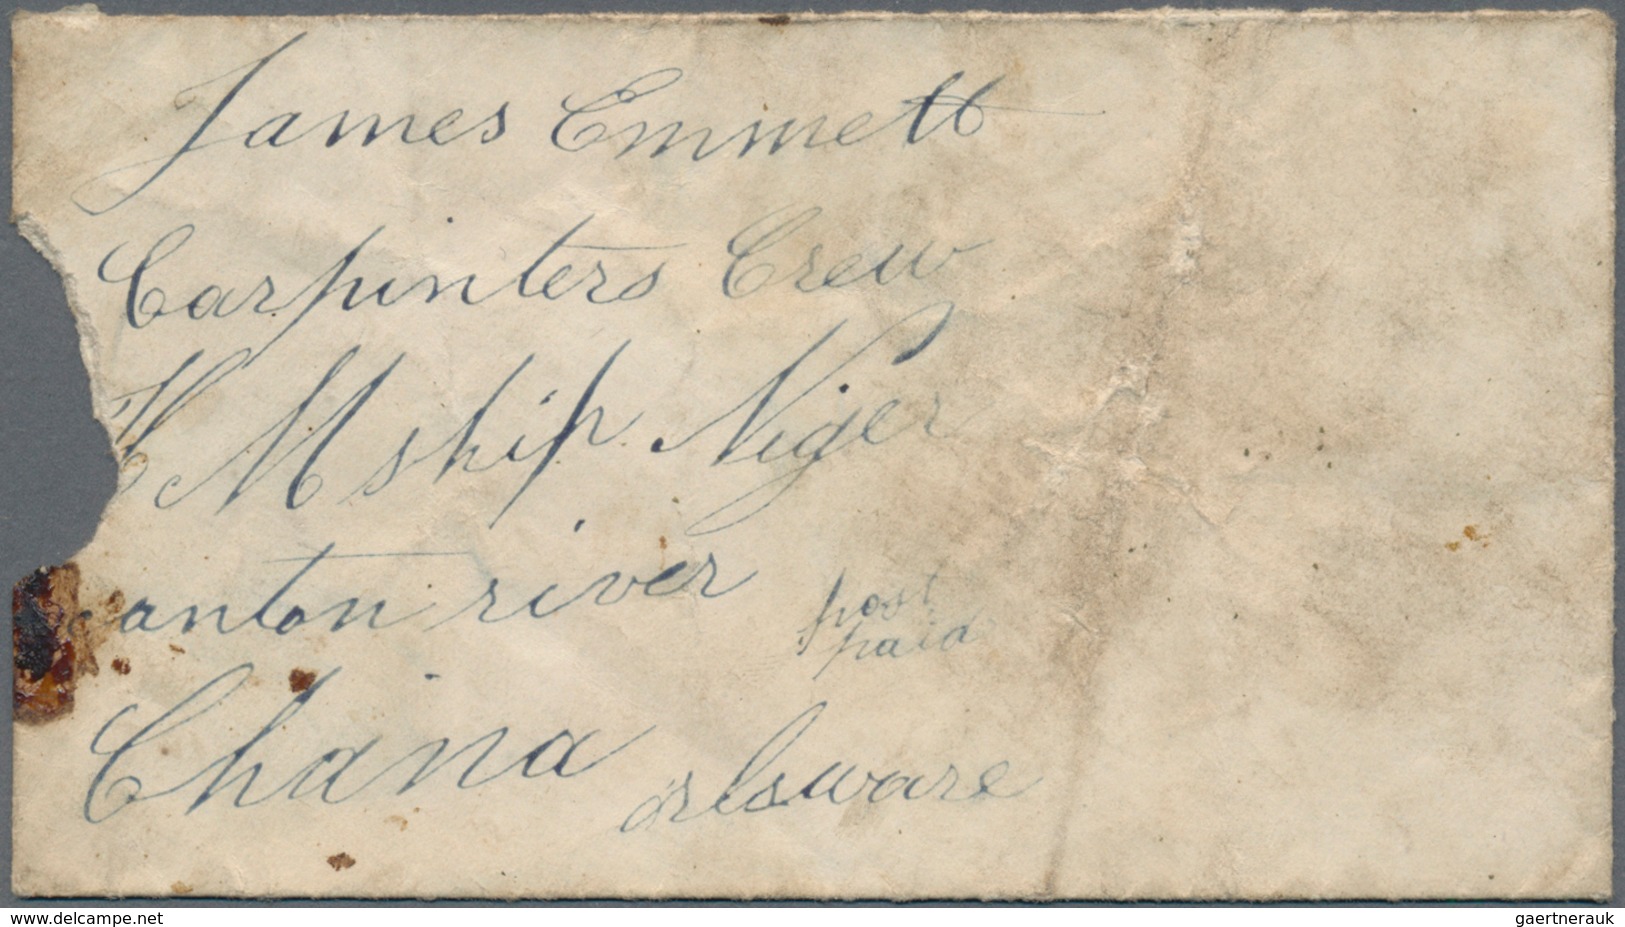 China: 1857-58 Correspondence from and to James Emmett on board H.M.S. "Niger" at CANTON RIVER and i